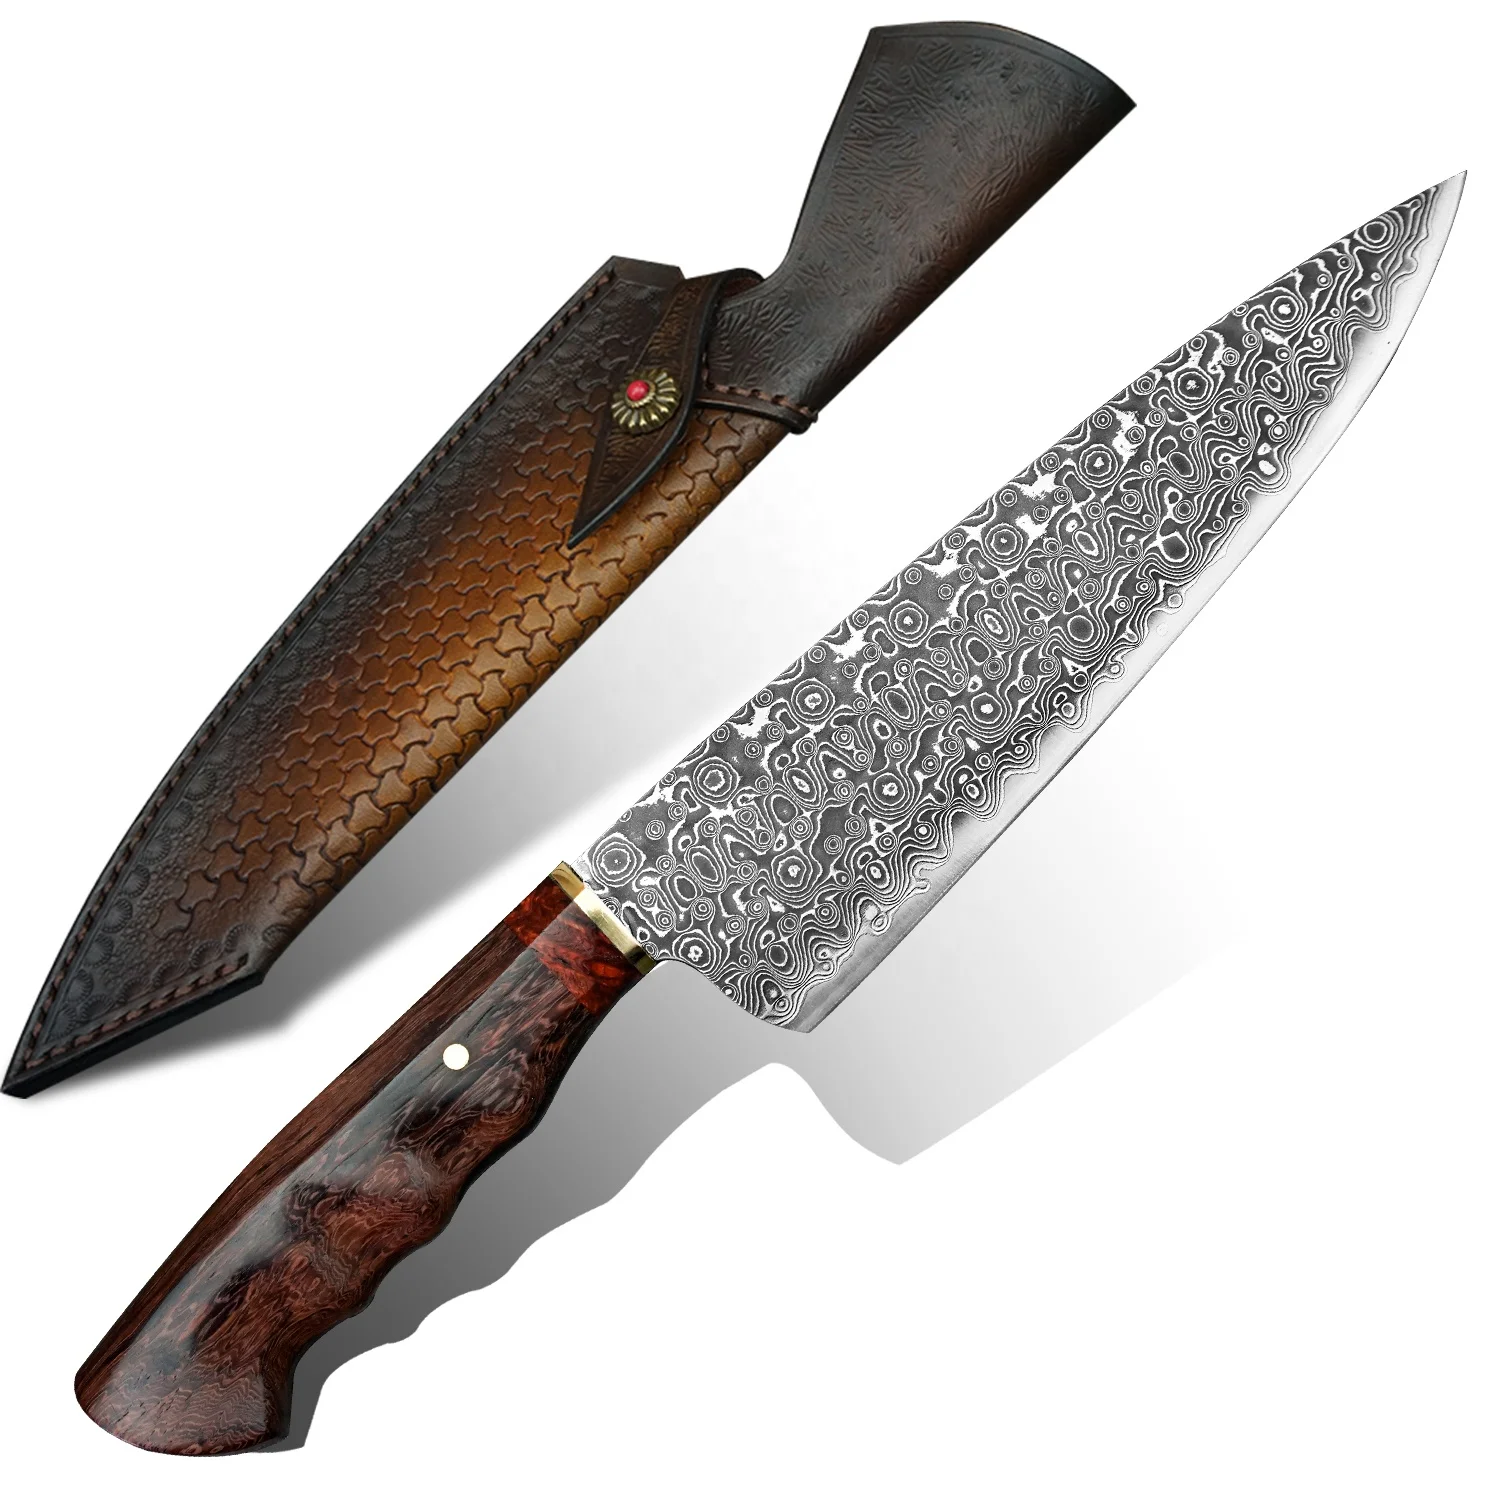 

Handmade 8in Rosewood Handle Japanese VG10 Damascus Steel Kitchen Chef Knife with Leather Sheath